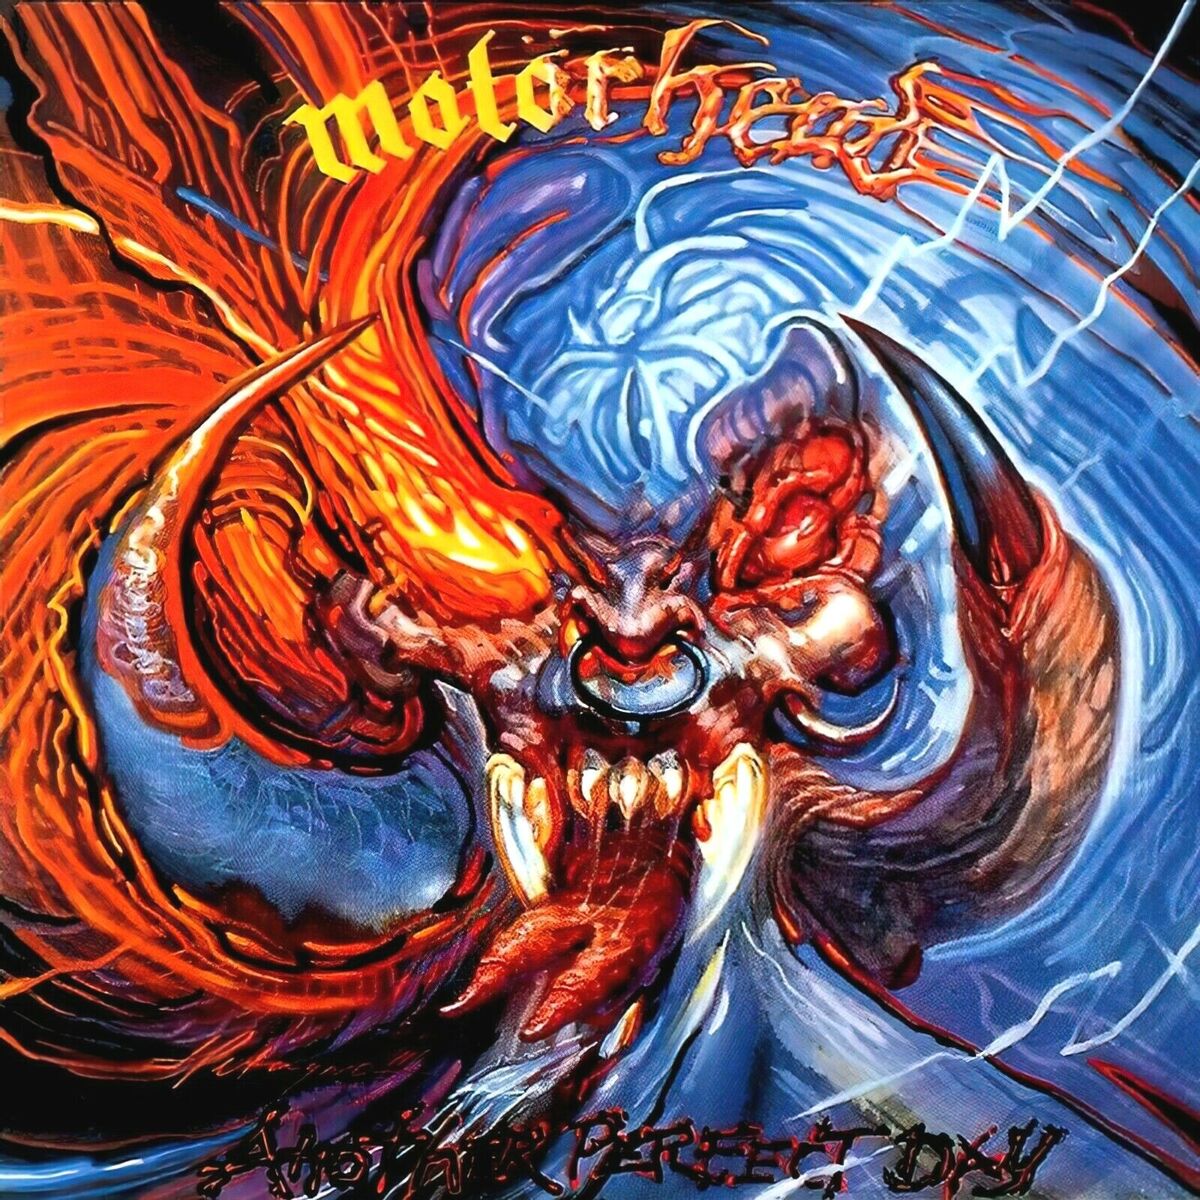 Металл BMG Motorhead - Another Perfect Day (Half Speed) (Coloured Vinyl LP) milk wonder perfect vanishing milk cup magic tricks magician magia cup stage illusions gimmick props funny